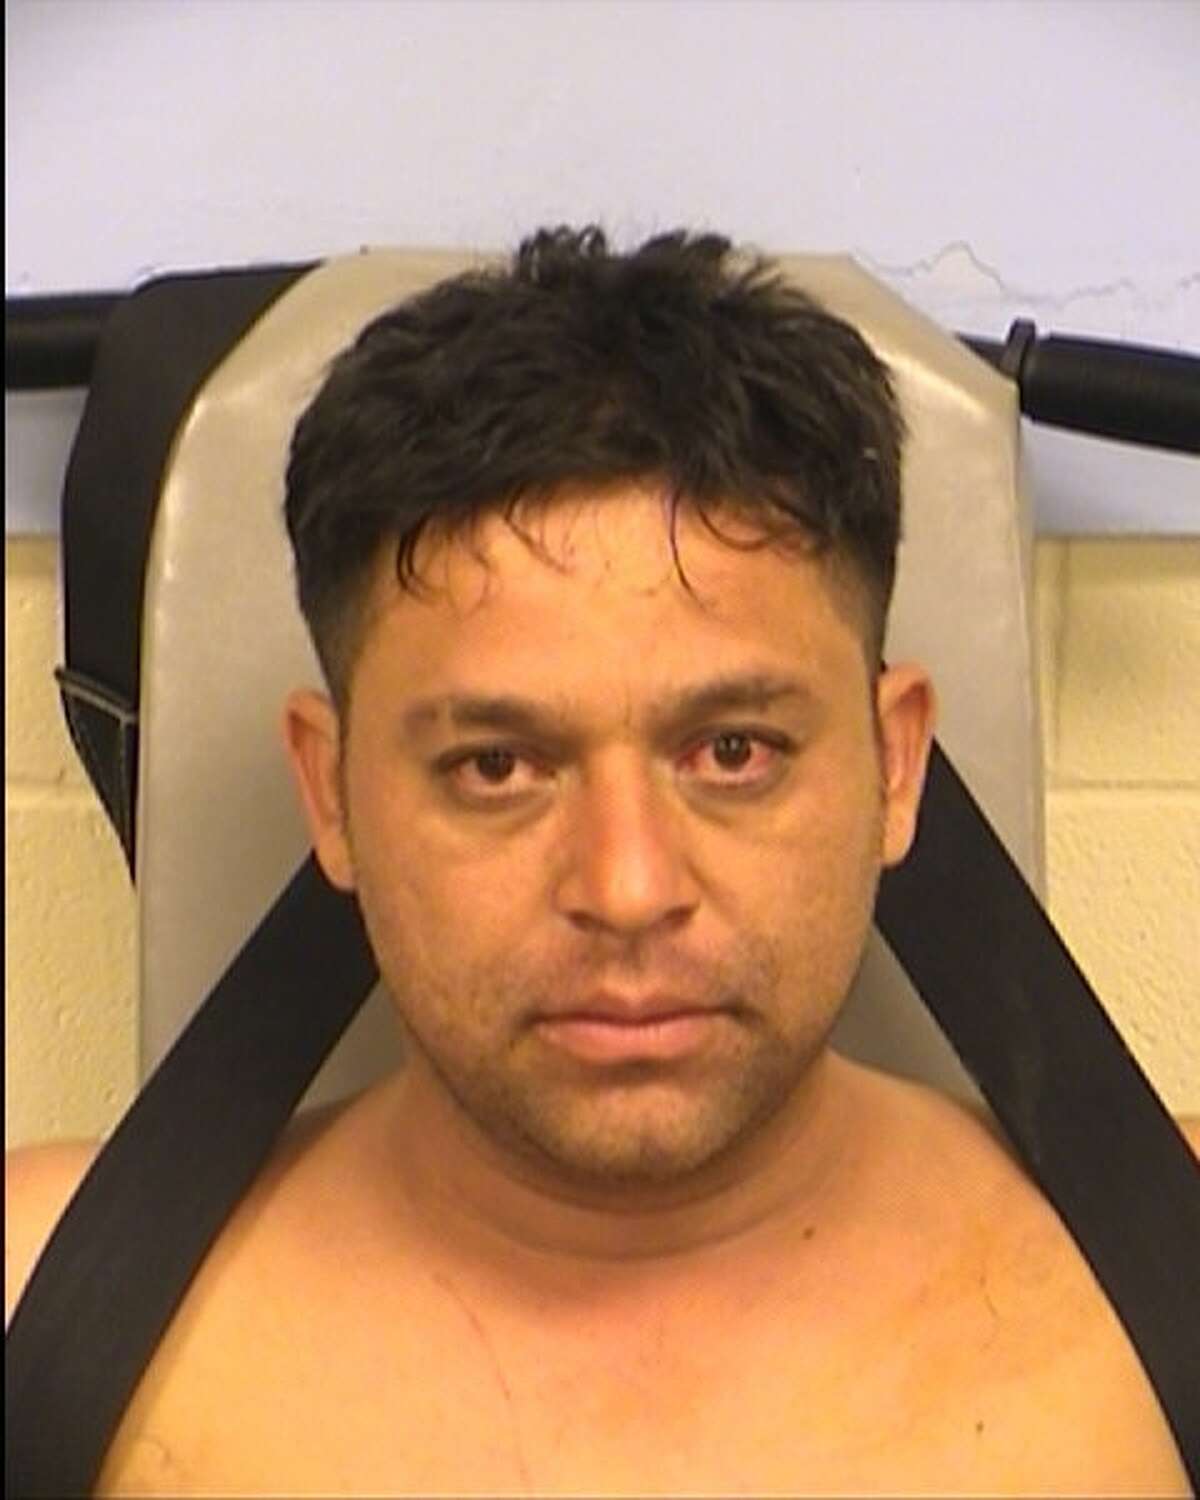 David Marquez Solis, 35, has been charged with second-degree felony arson in connection with a grass fire in North Austin on Oct. 5, 2015.